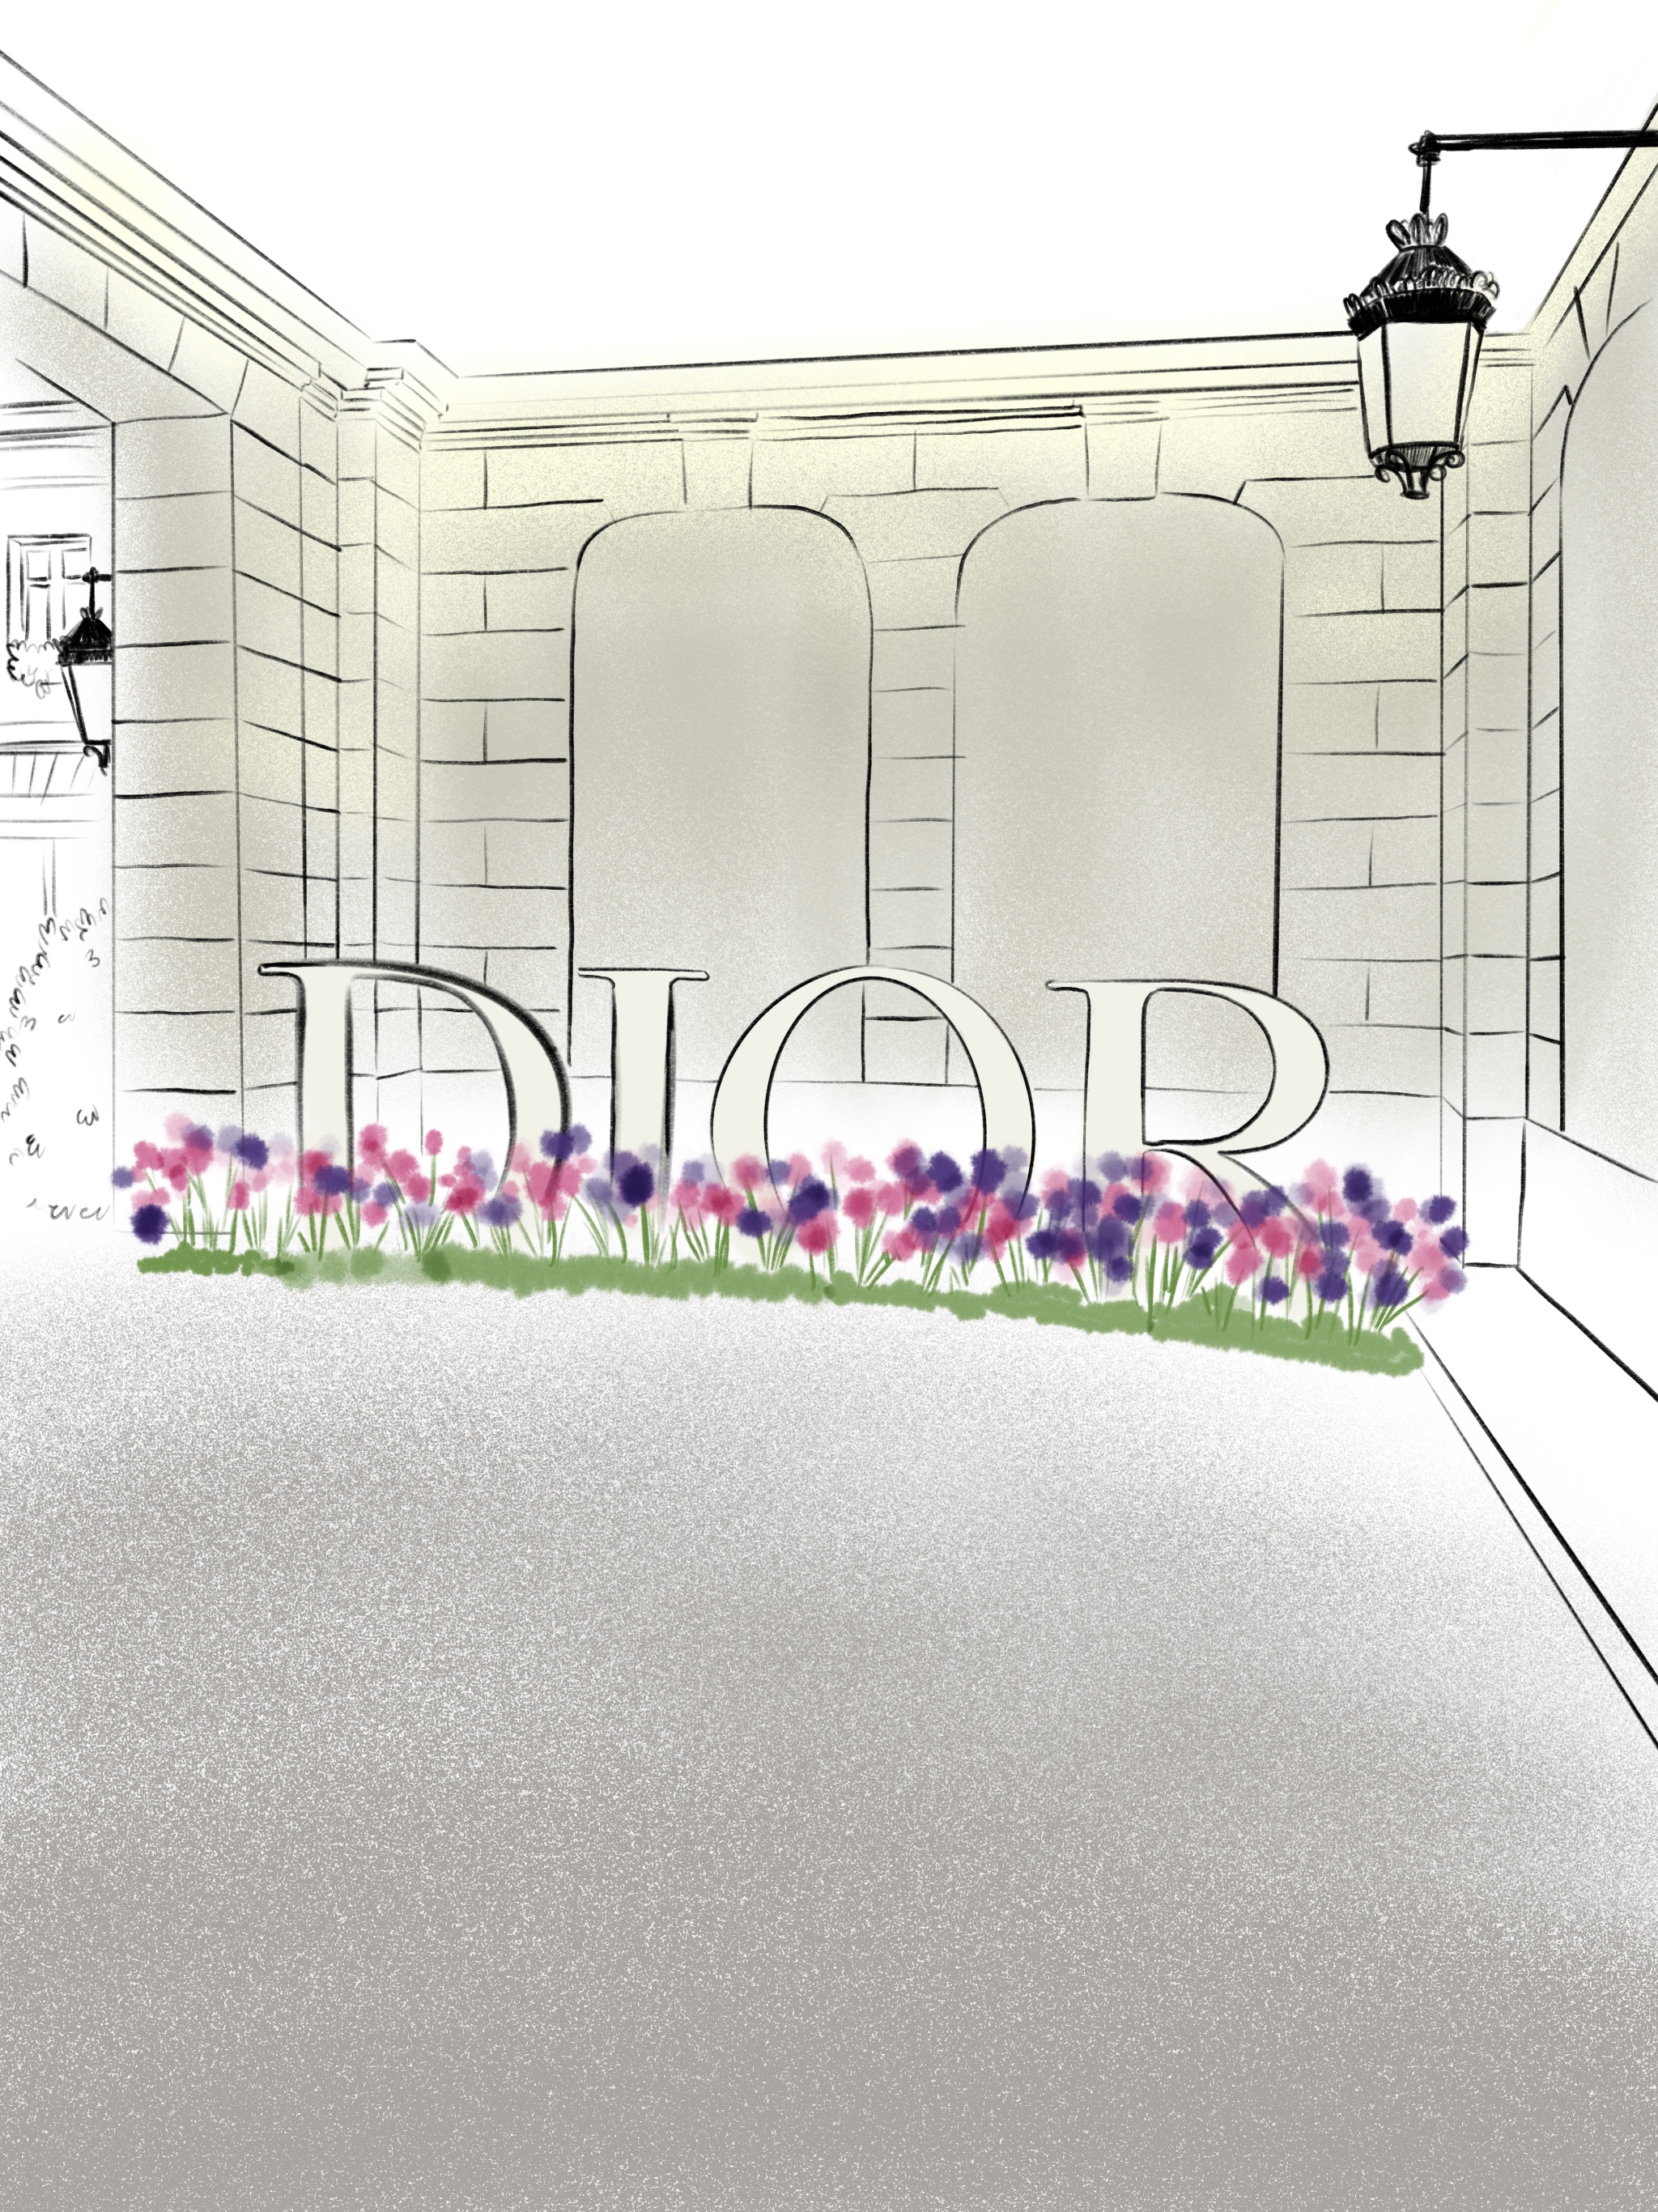 live-drawing-dior 6